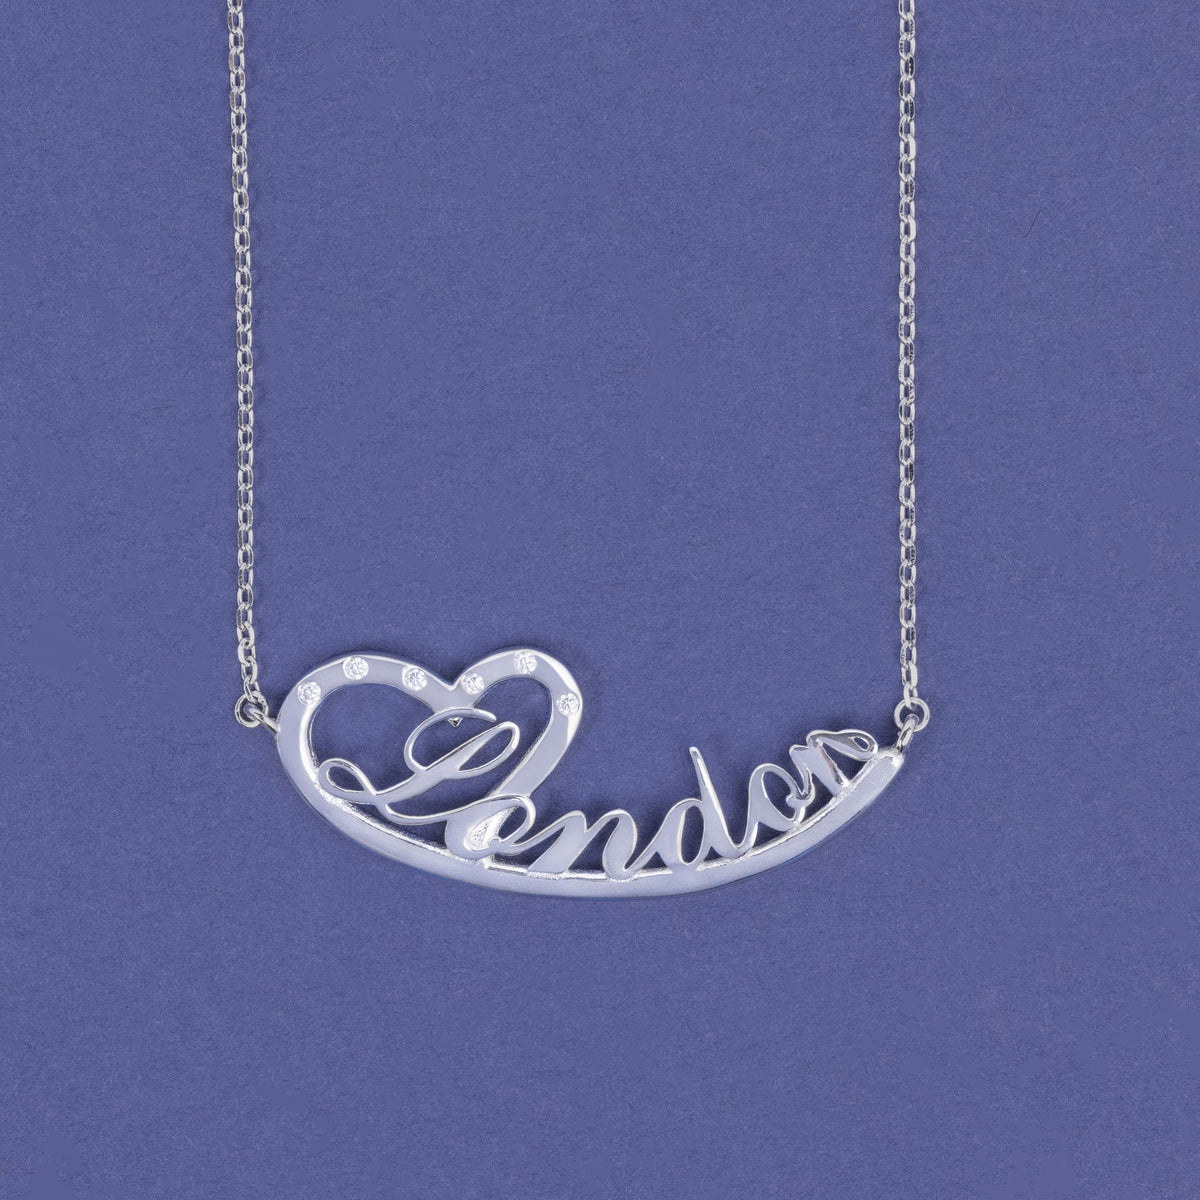 ‘’London’’ 925 Sterling Silver Necklace